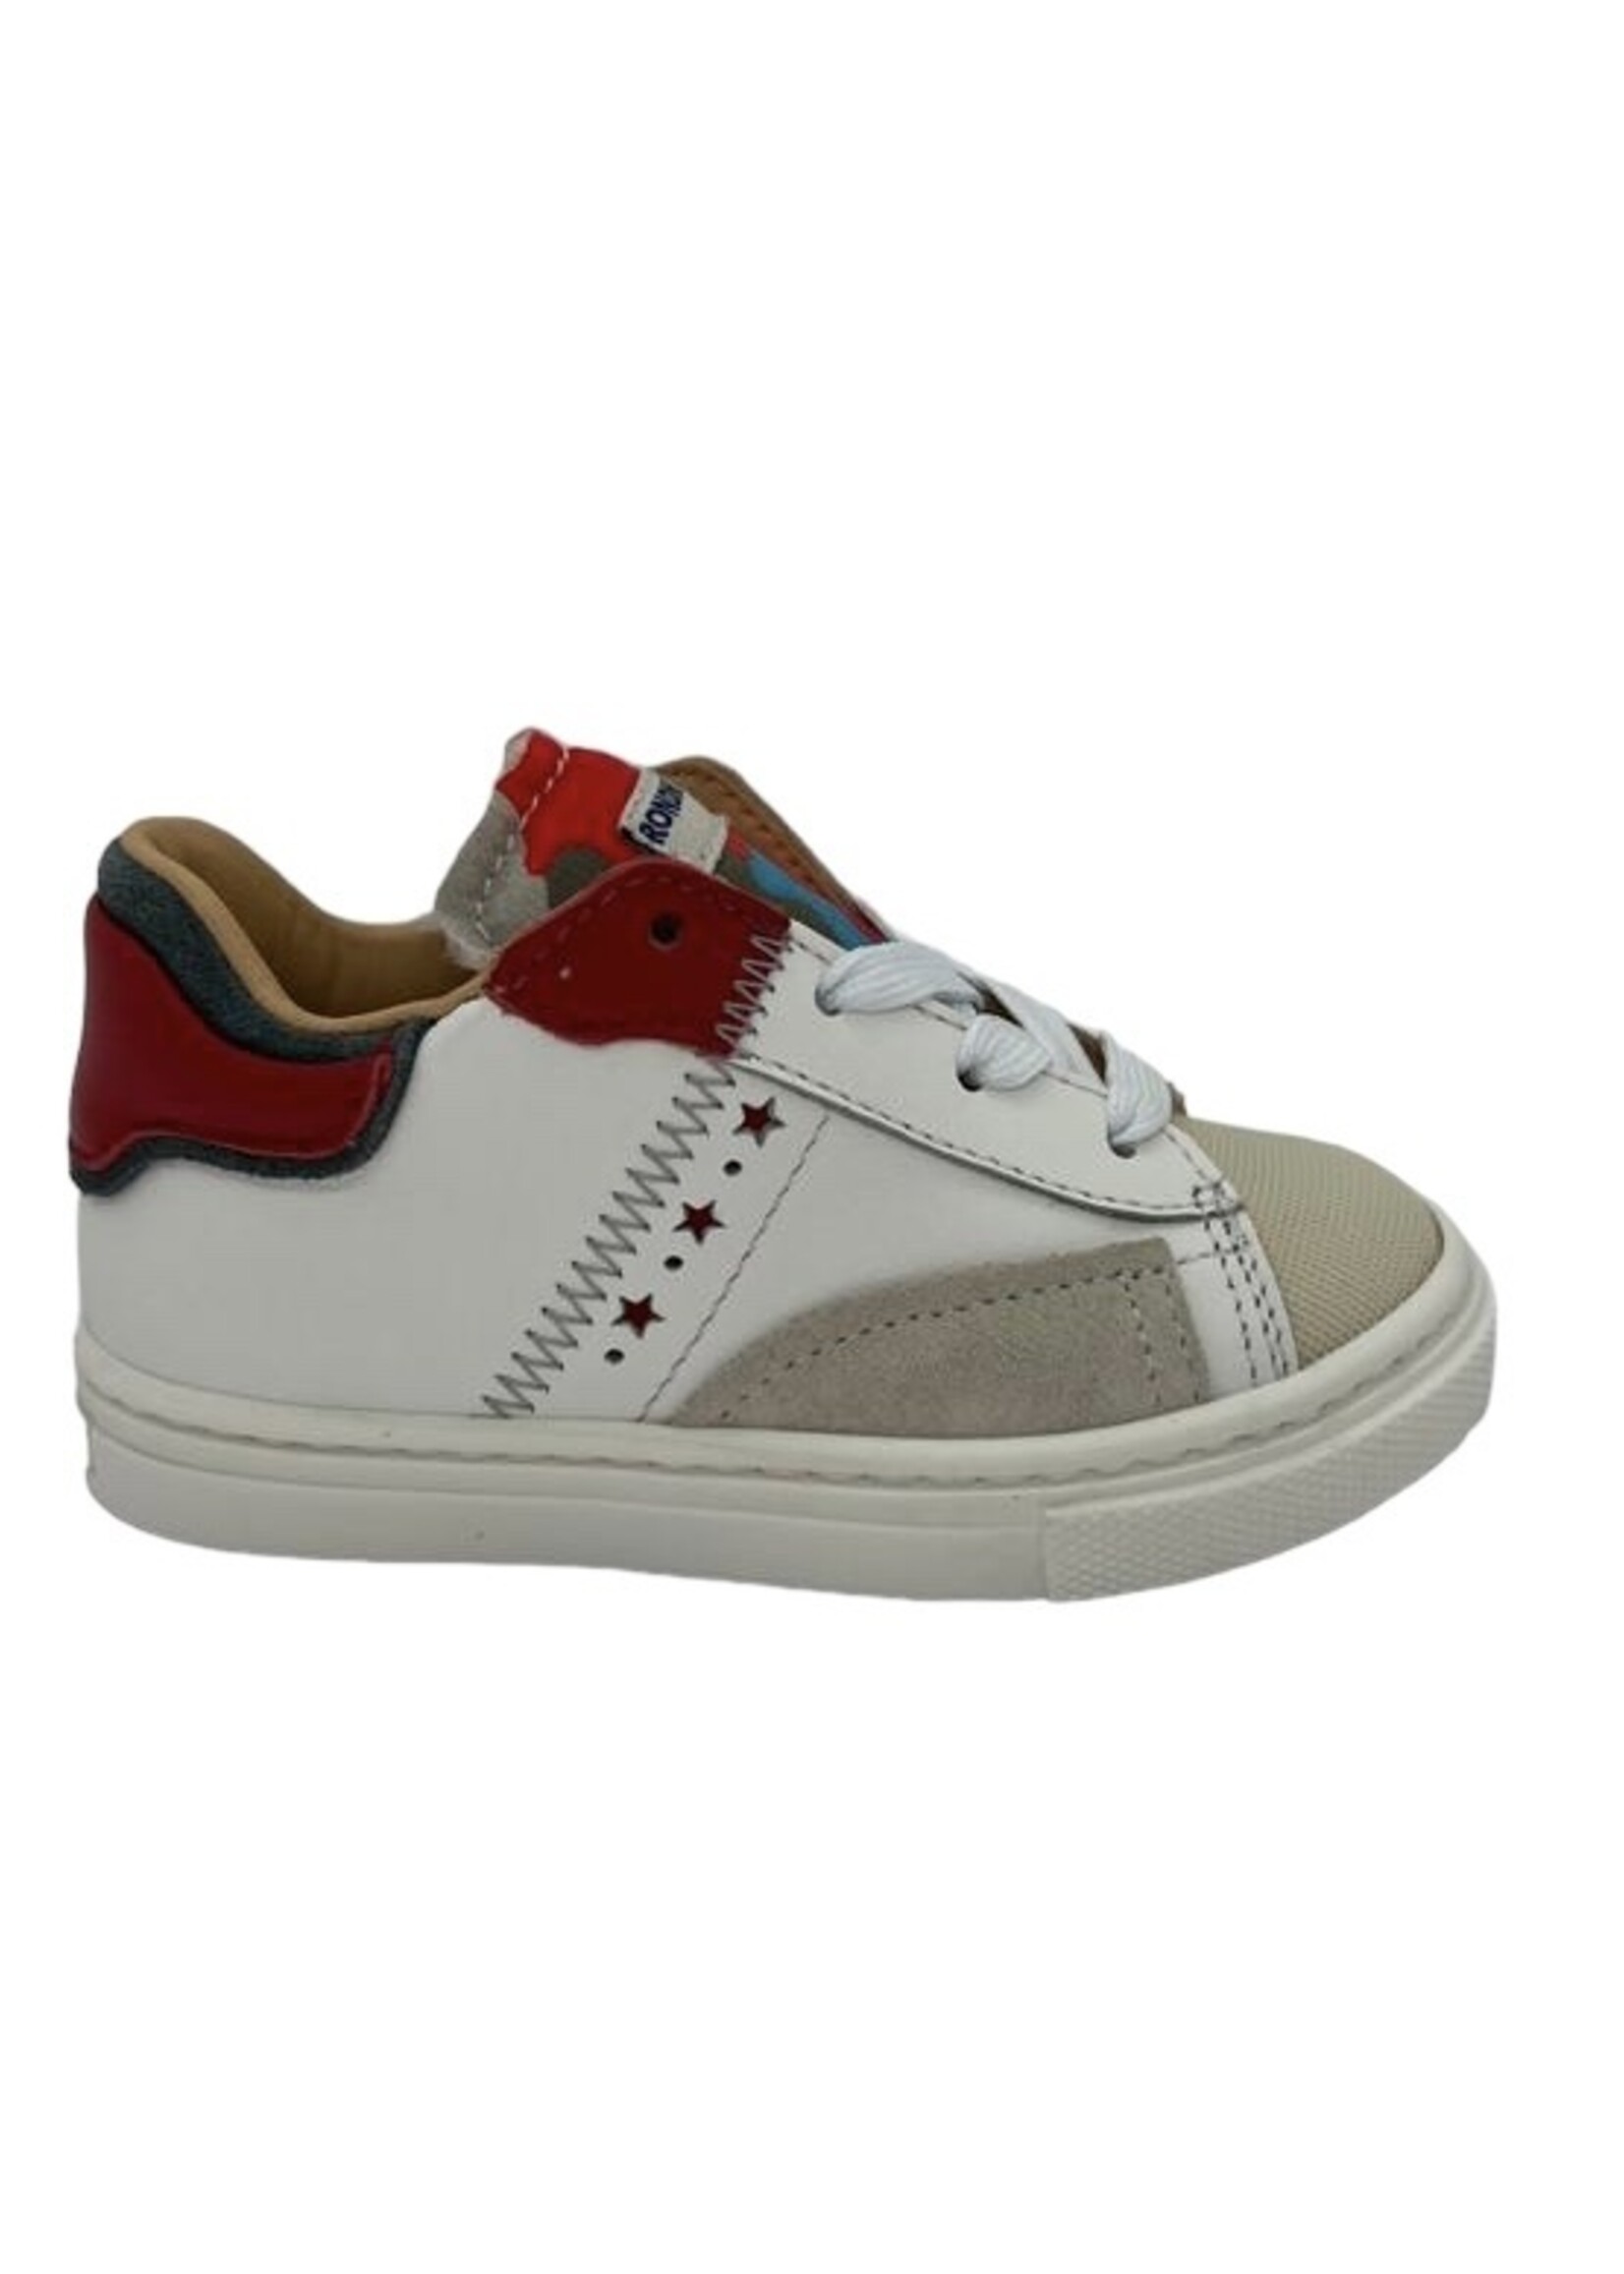 Rondinella 4771 sneaker wit rood